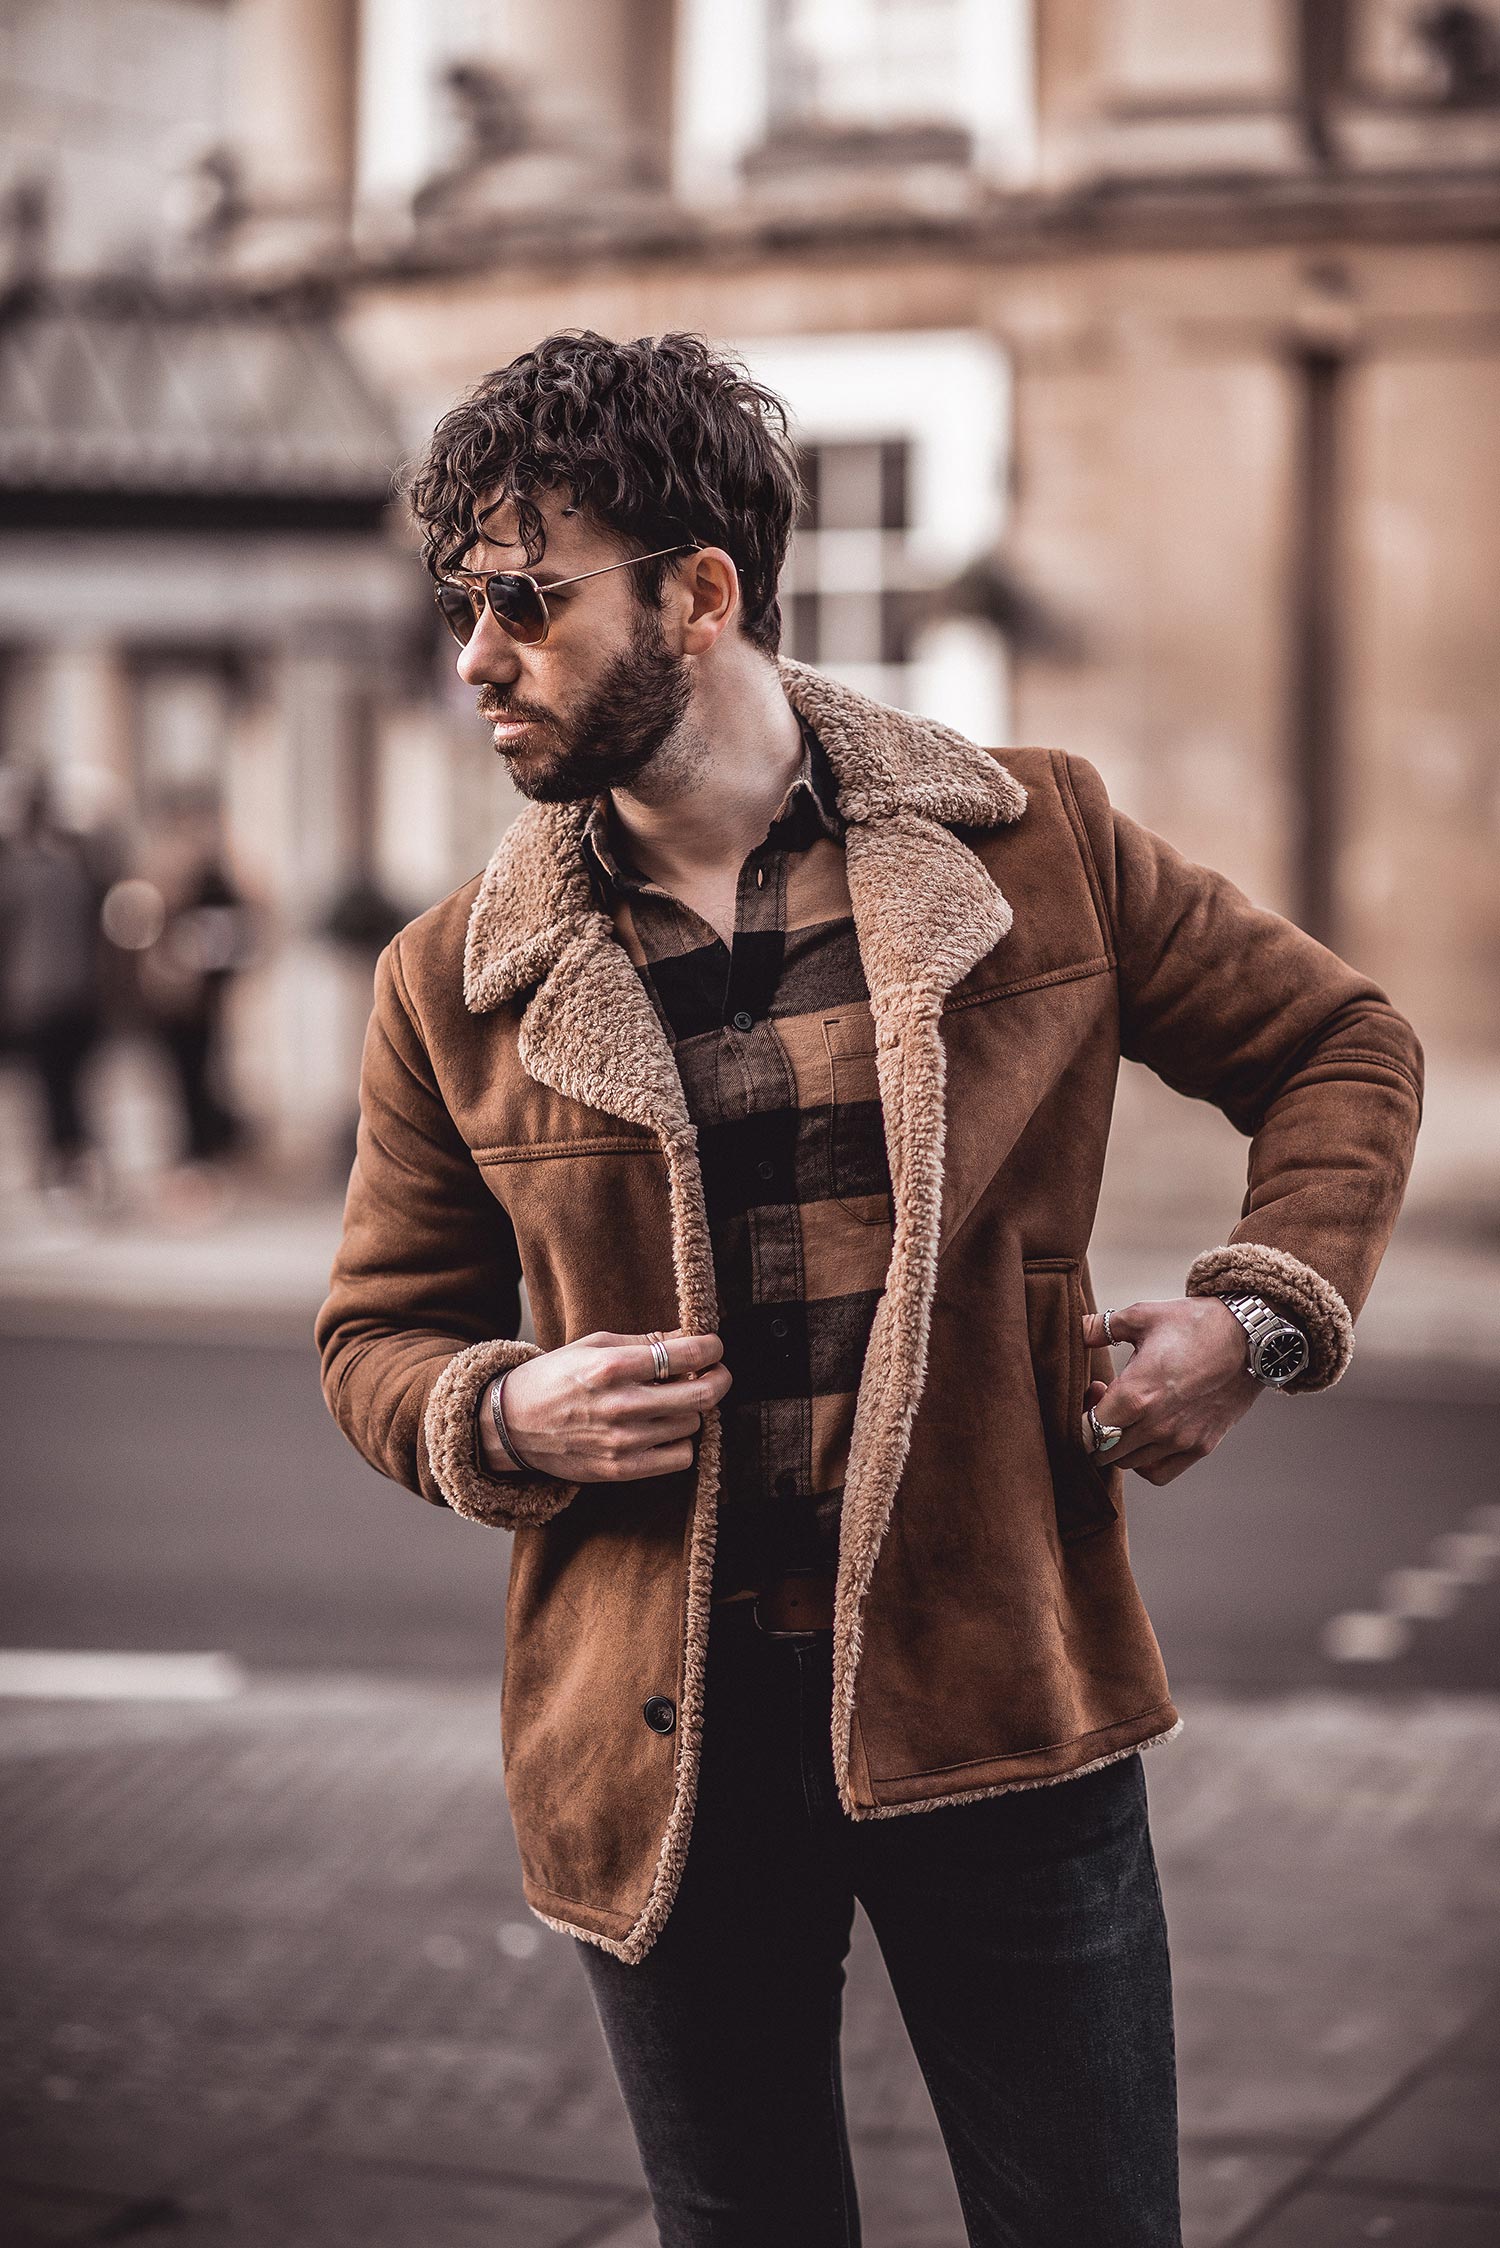 Brown And Black Vintage Style Outfit - Your Average Guy